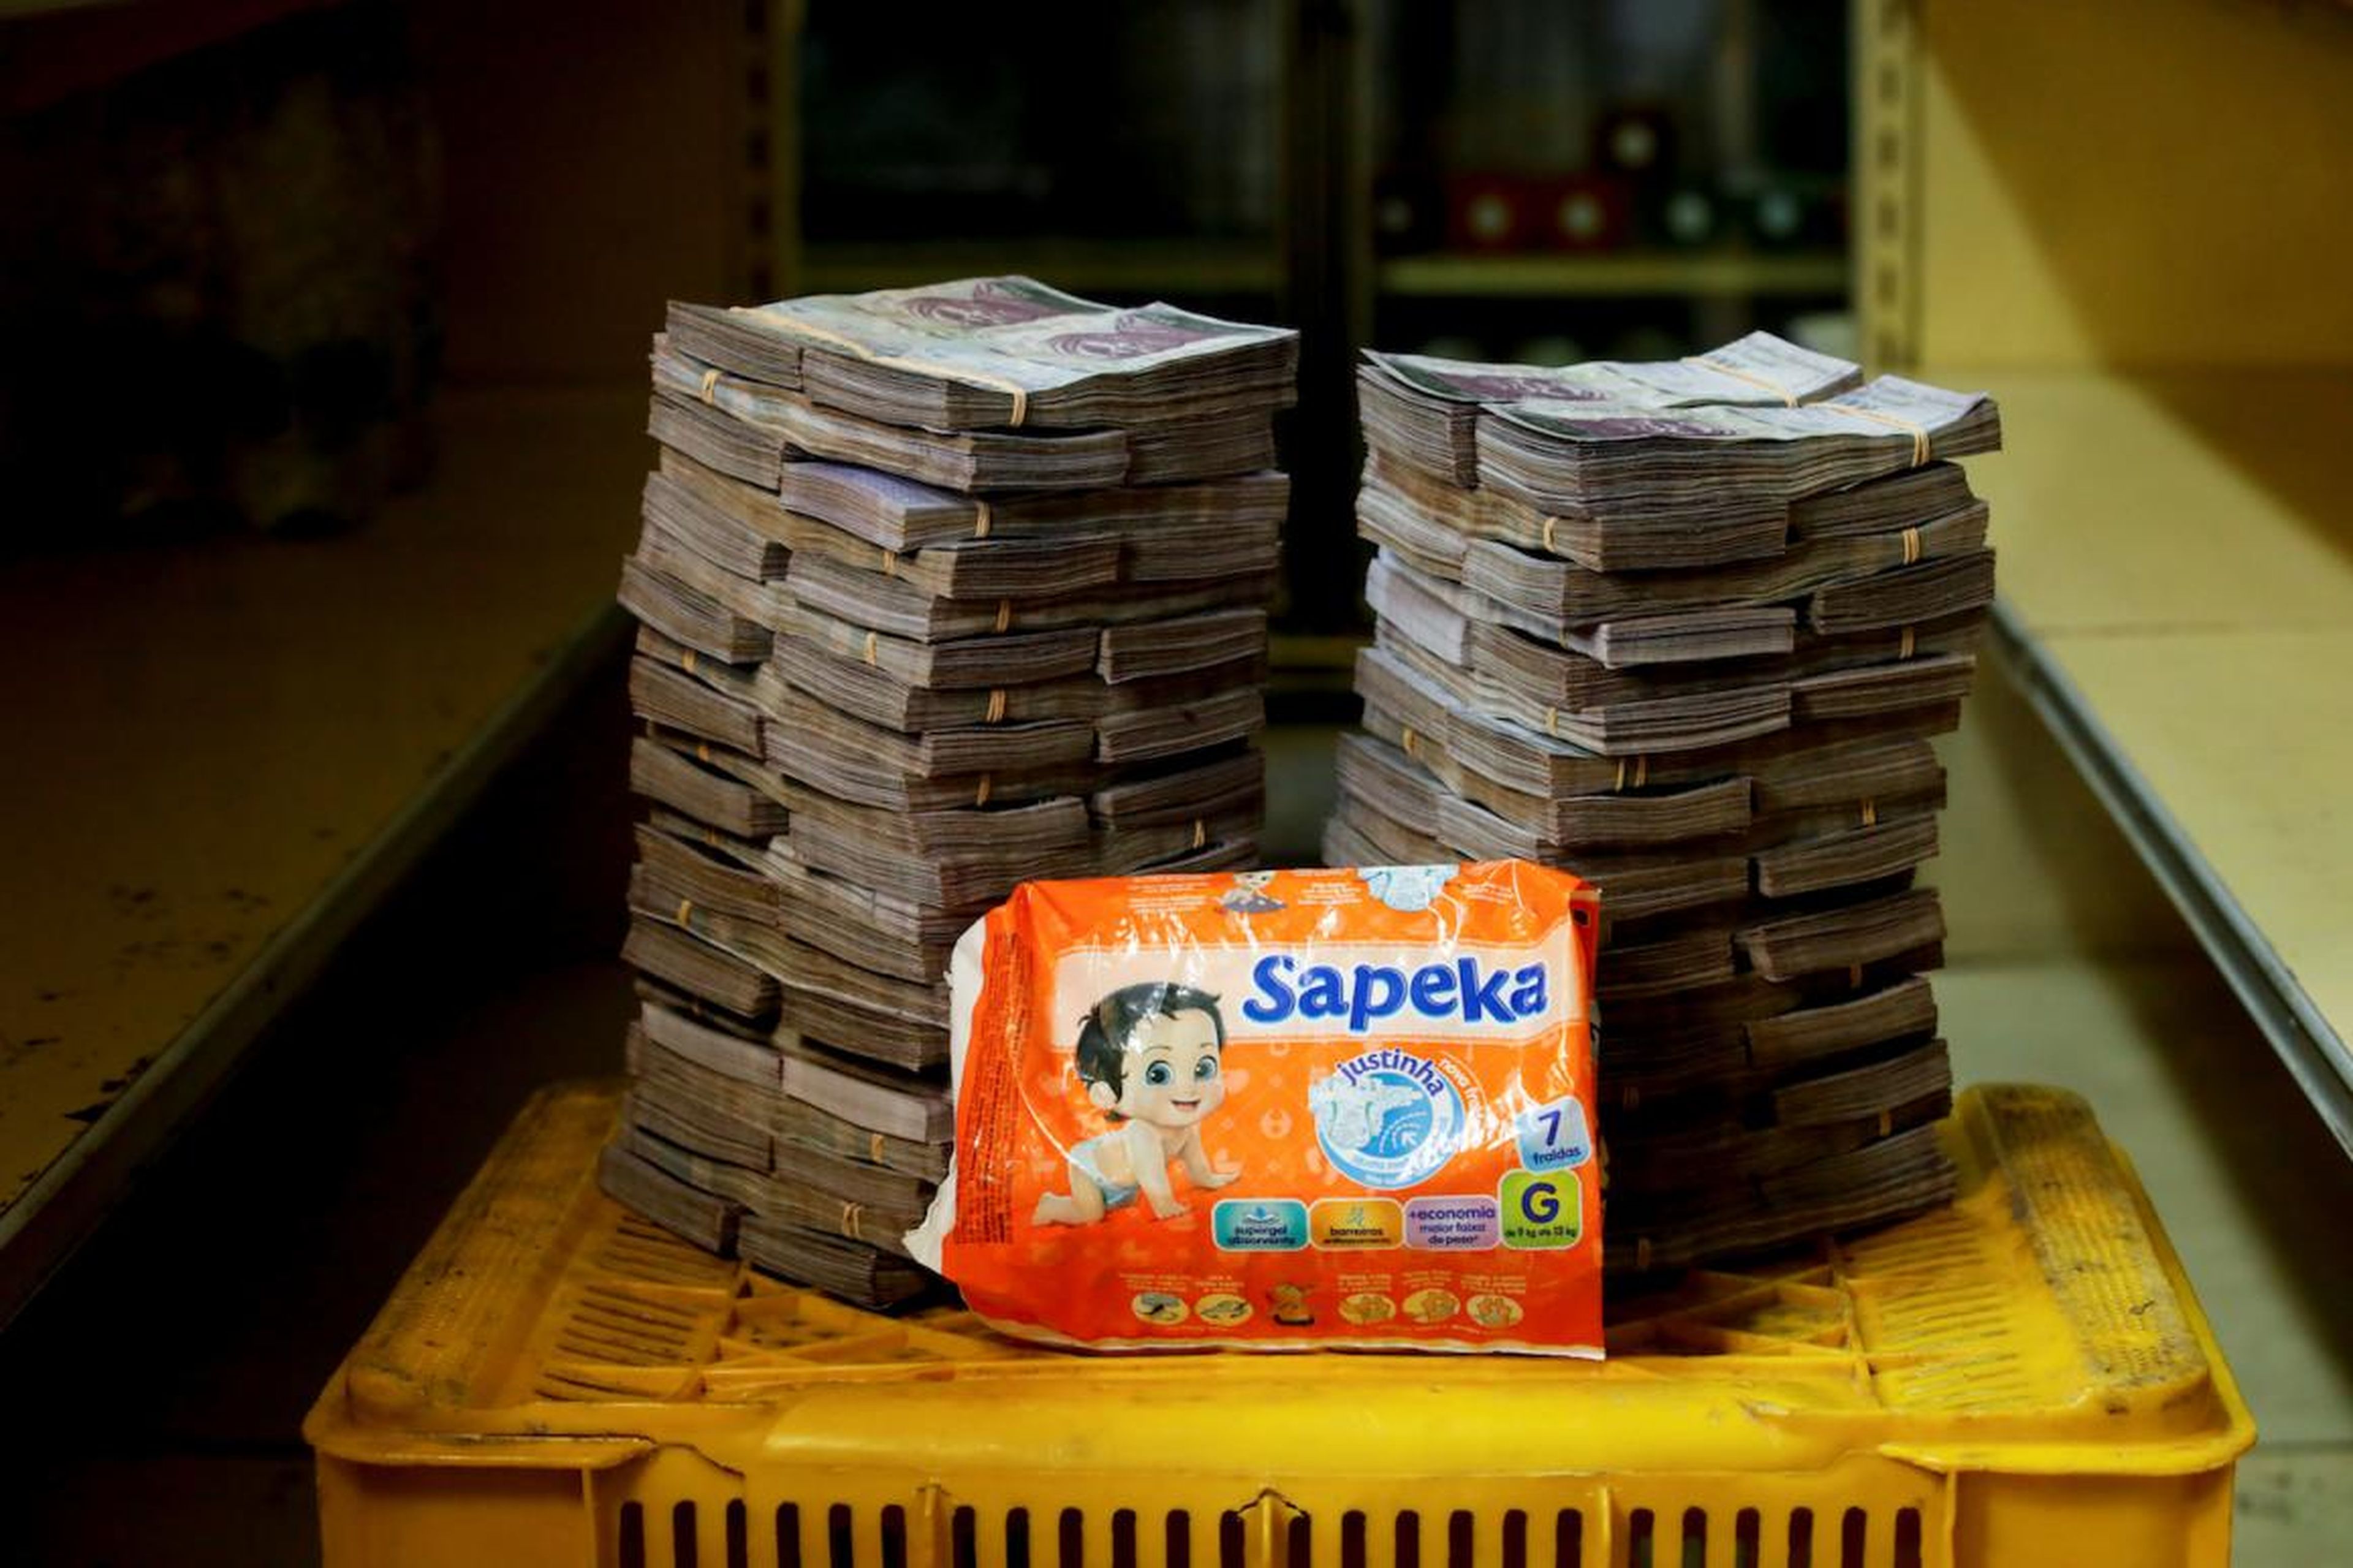 A package of diapers is pictured next to 8,000,000 bolivars, its price and the equivalent of 1.22 USD, at a mini-market in Caracas.